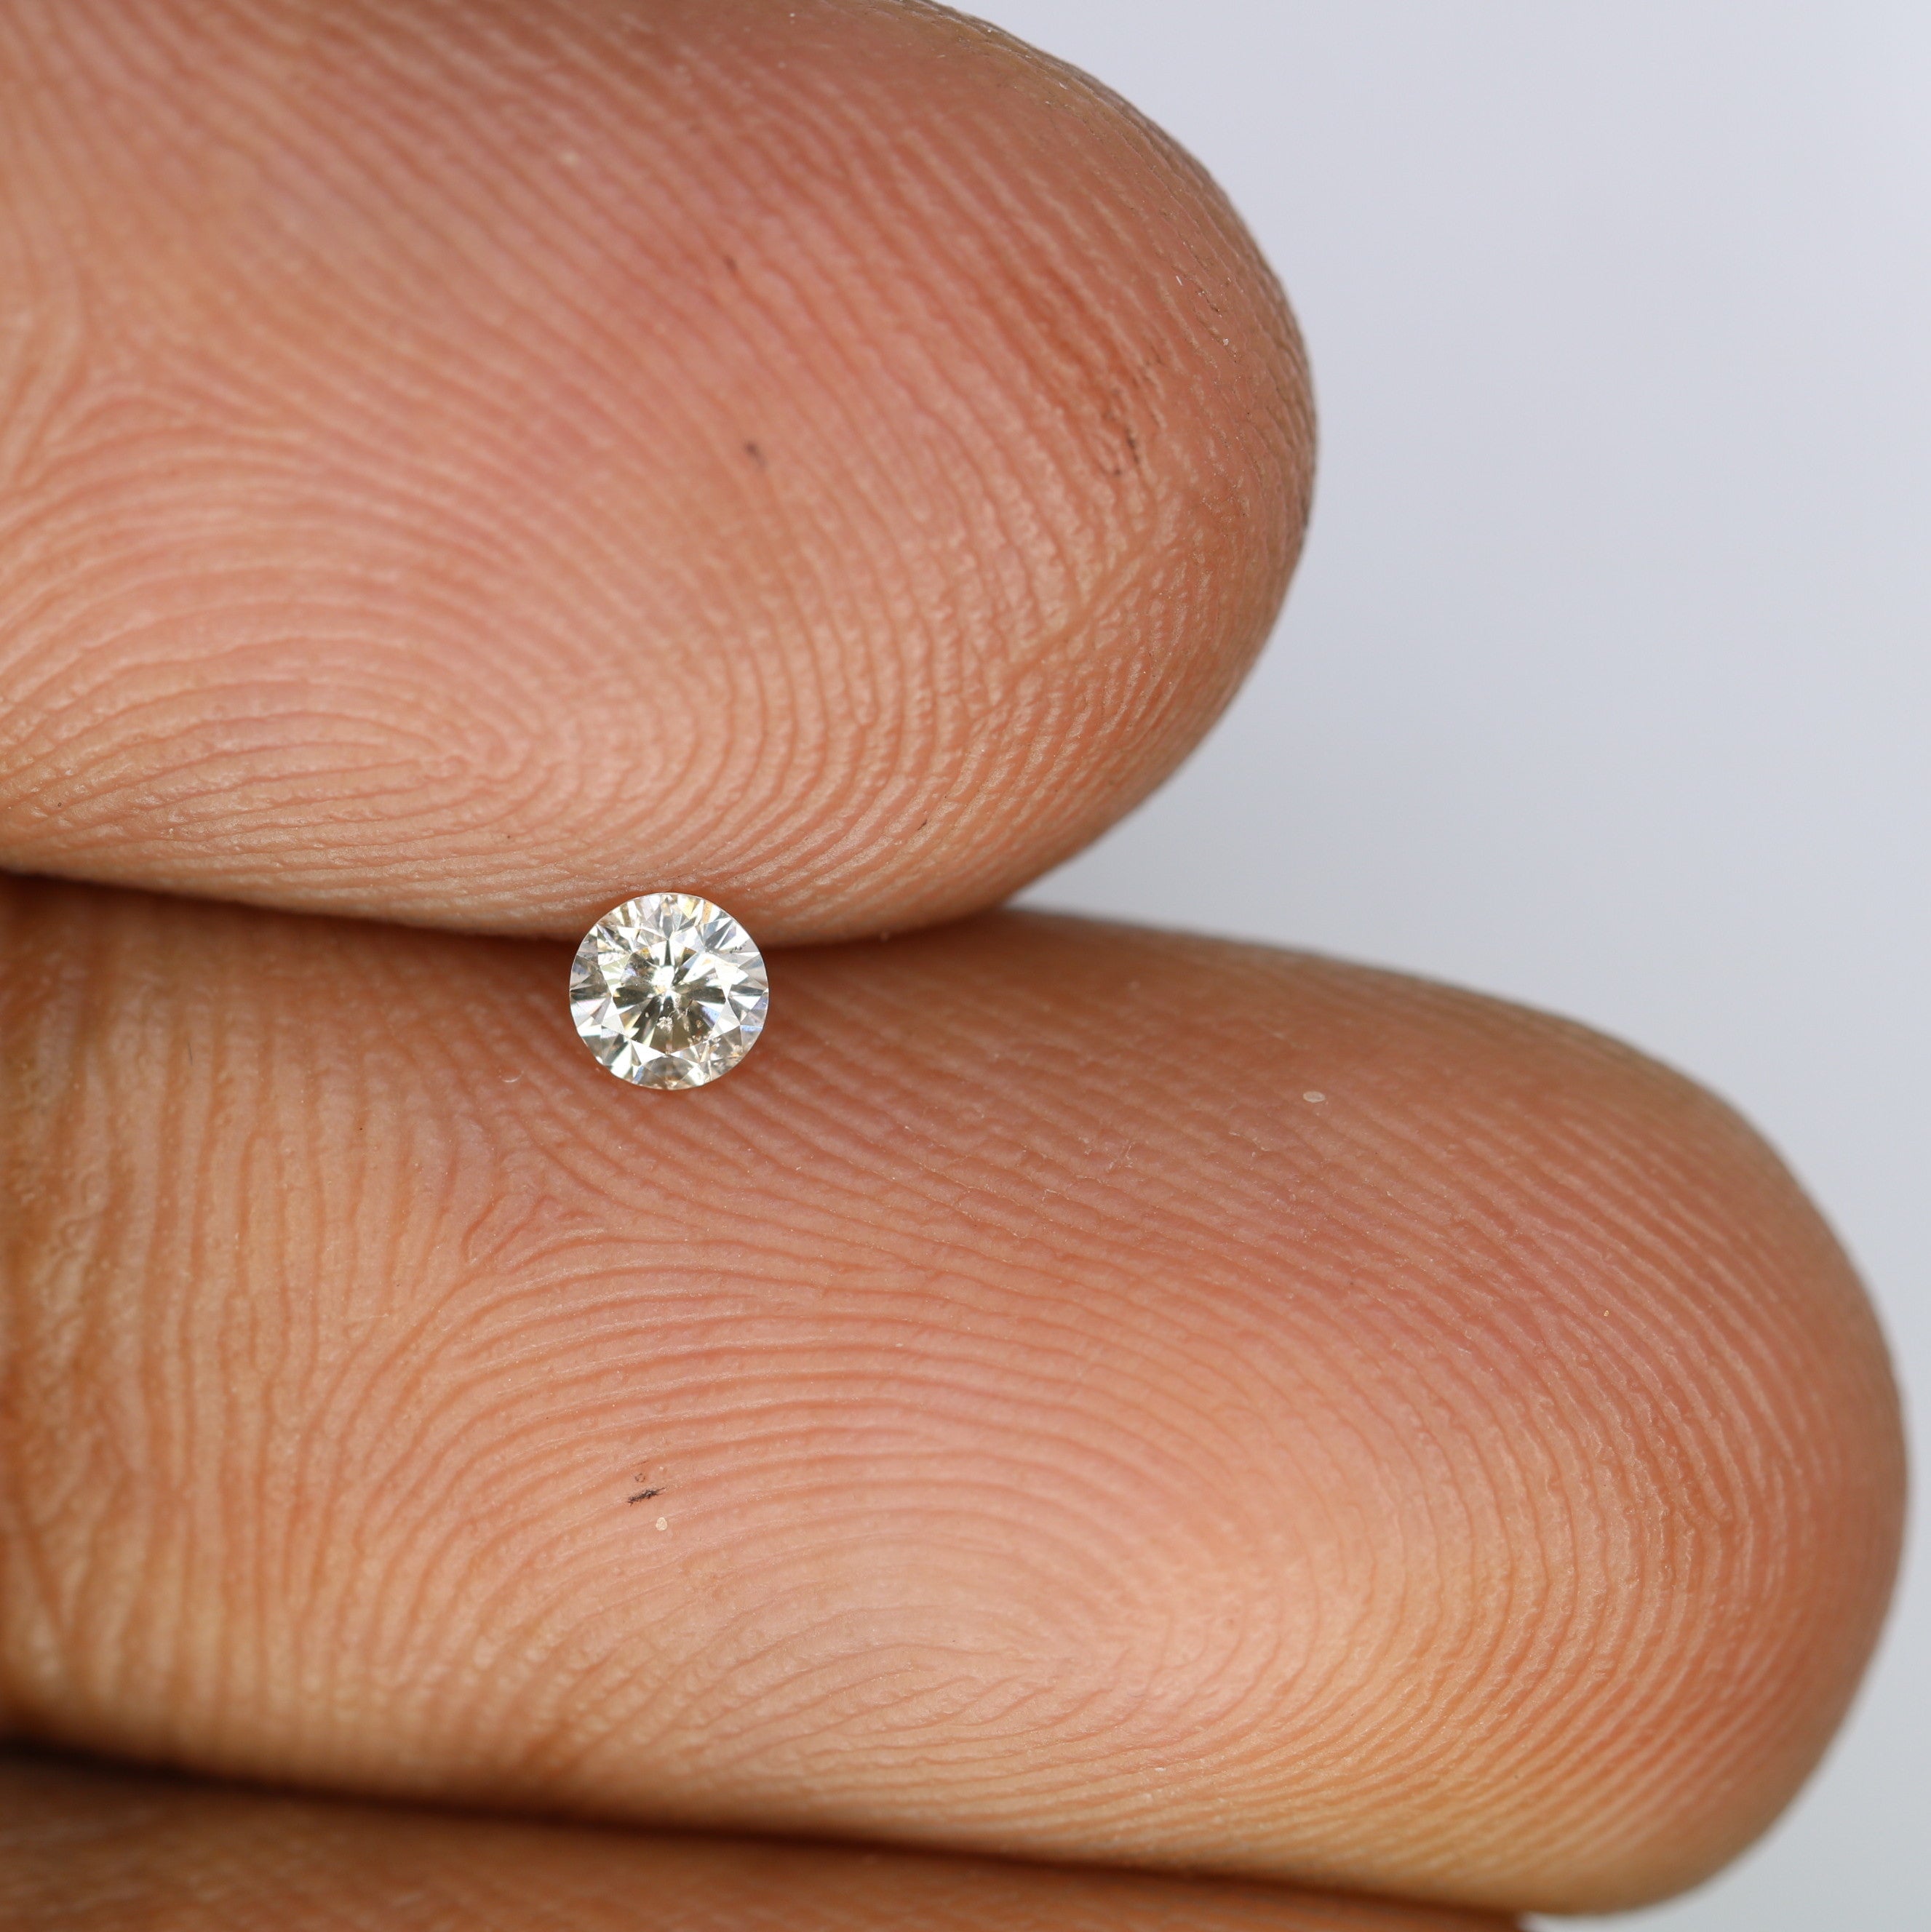 0.12 CT 3.10 x 1.90 MM Very light Yellow Round Brilliant Cut Diamond For Engagement Ring